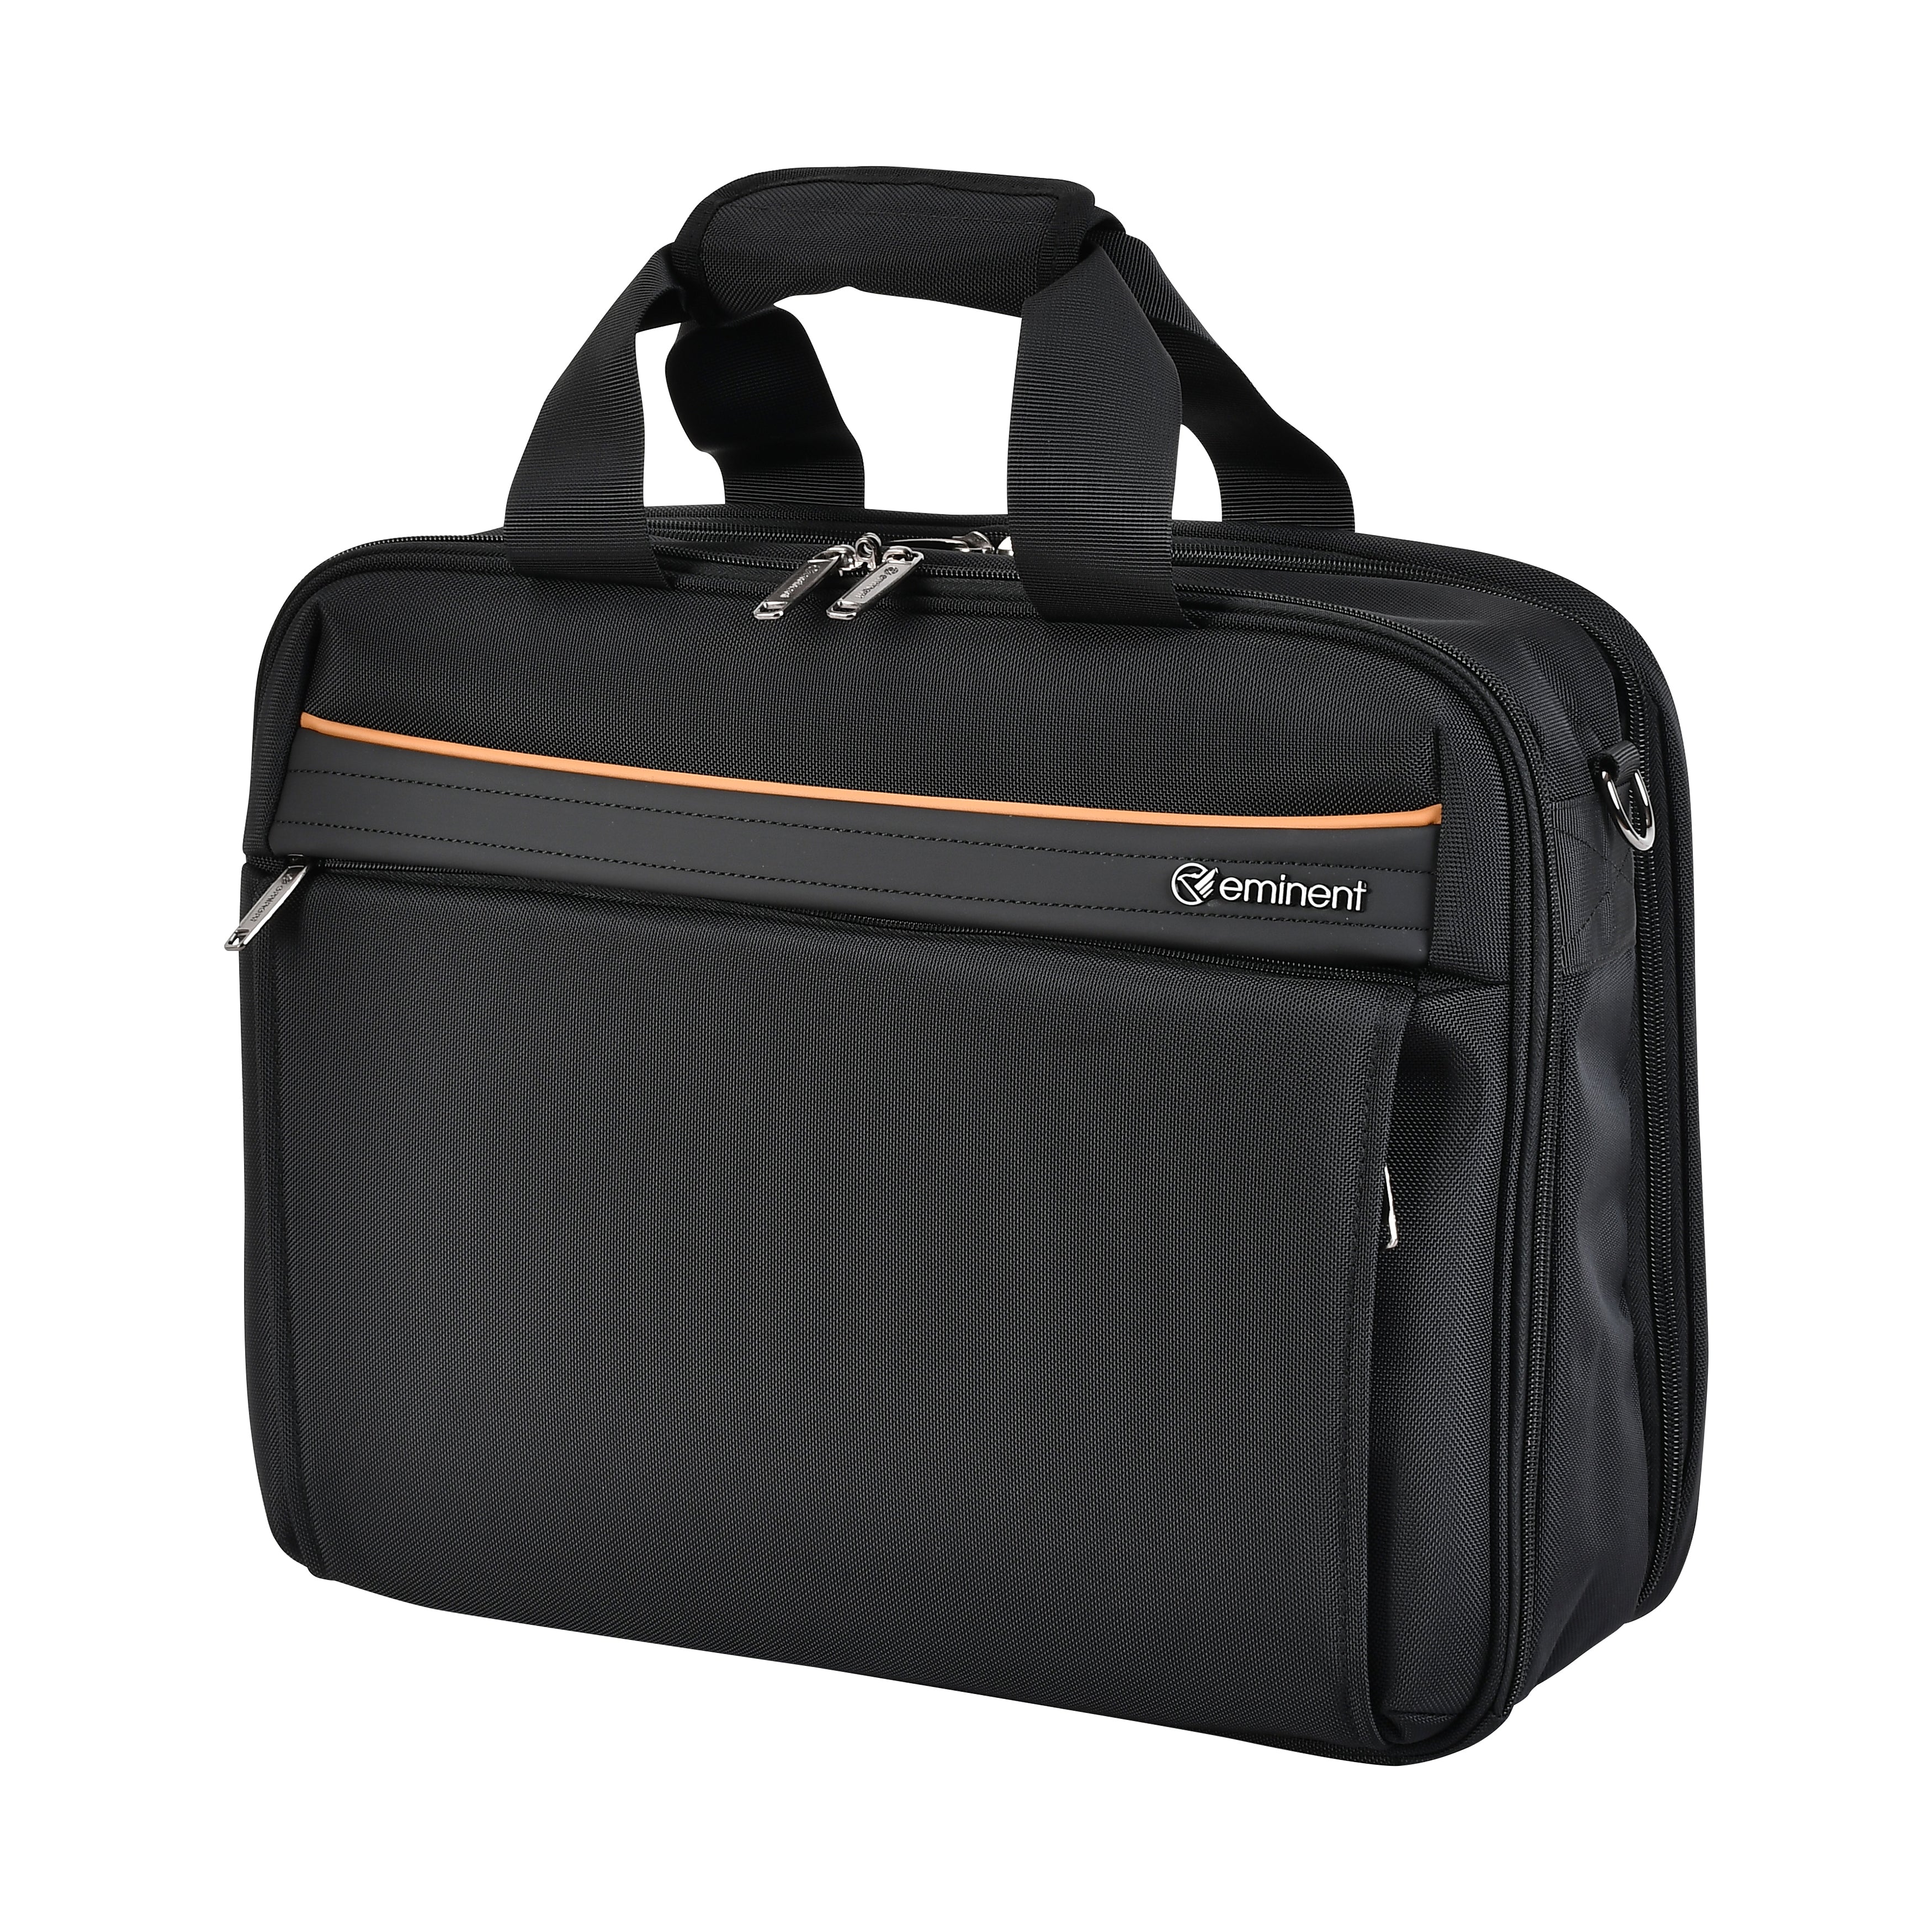 Eminent Premium Polyester Shoulder Laptop Bag 17 Inch Light Weight 180° Opening Business Laptop Briefcase for Men Women on Travel Business, S0790-17